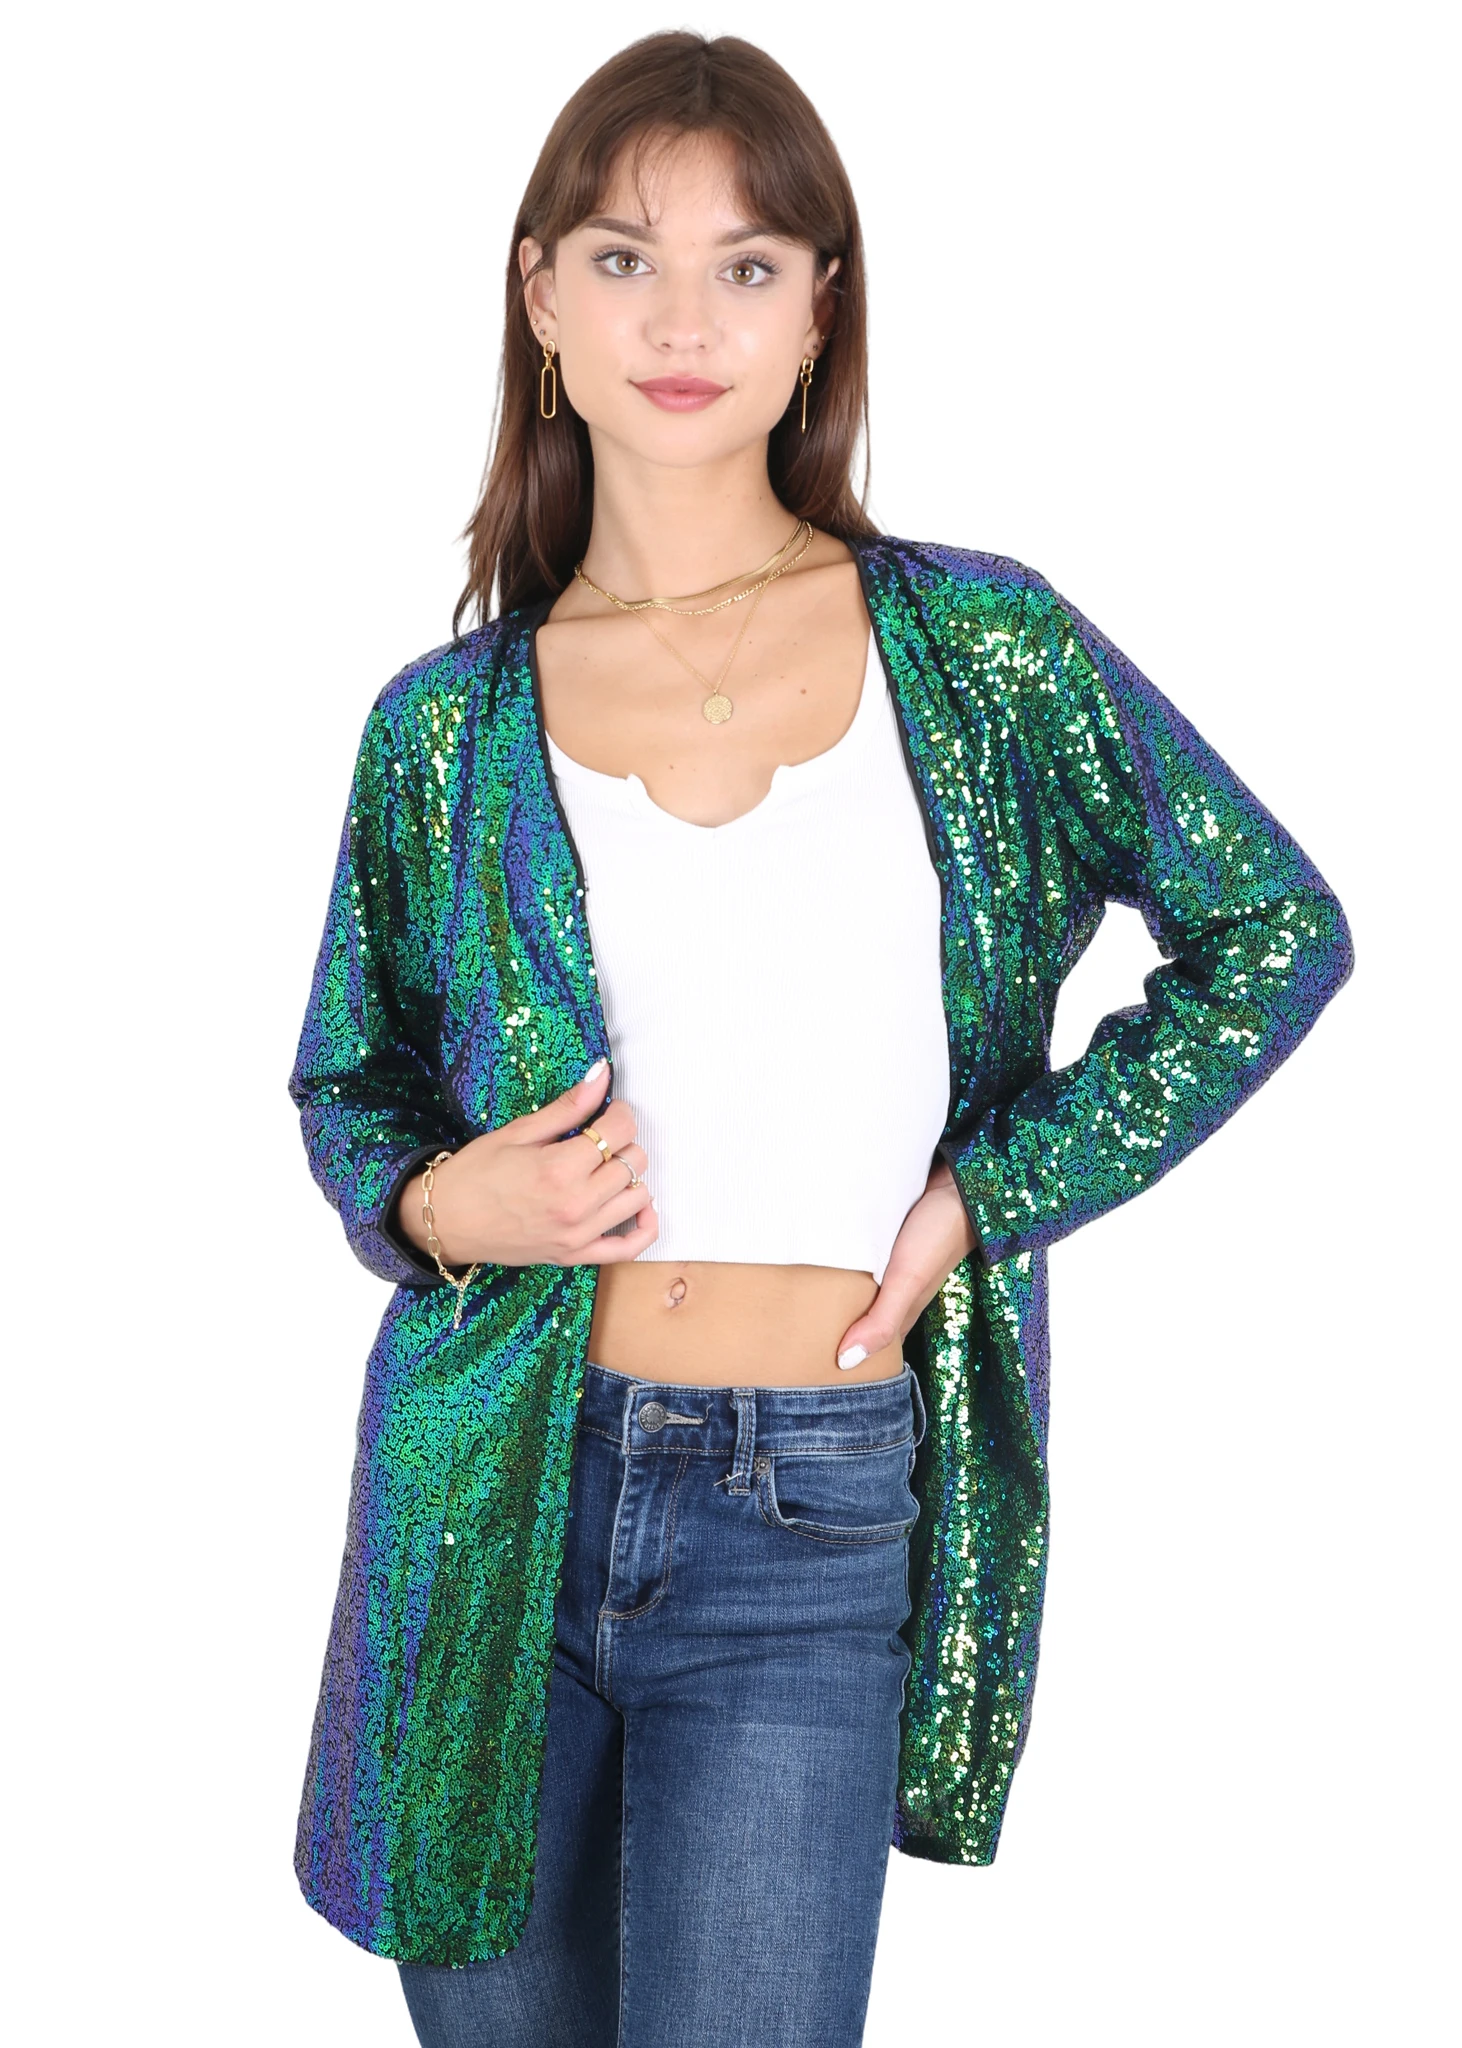 Women's Open Front Sequin Coat Las Vegas Blazer Party Club Cocktail Jacket Outerwear Sparkly Sequined Cardigan Jacket midi zaful women s halter tied backless ruched slinky asymmetric midi party vegas dress m deep red